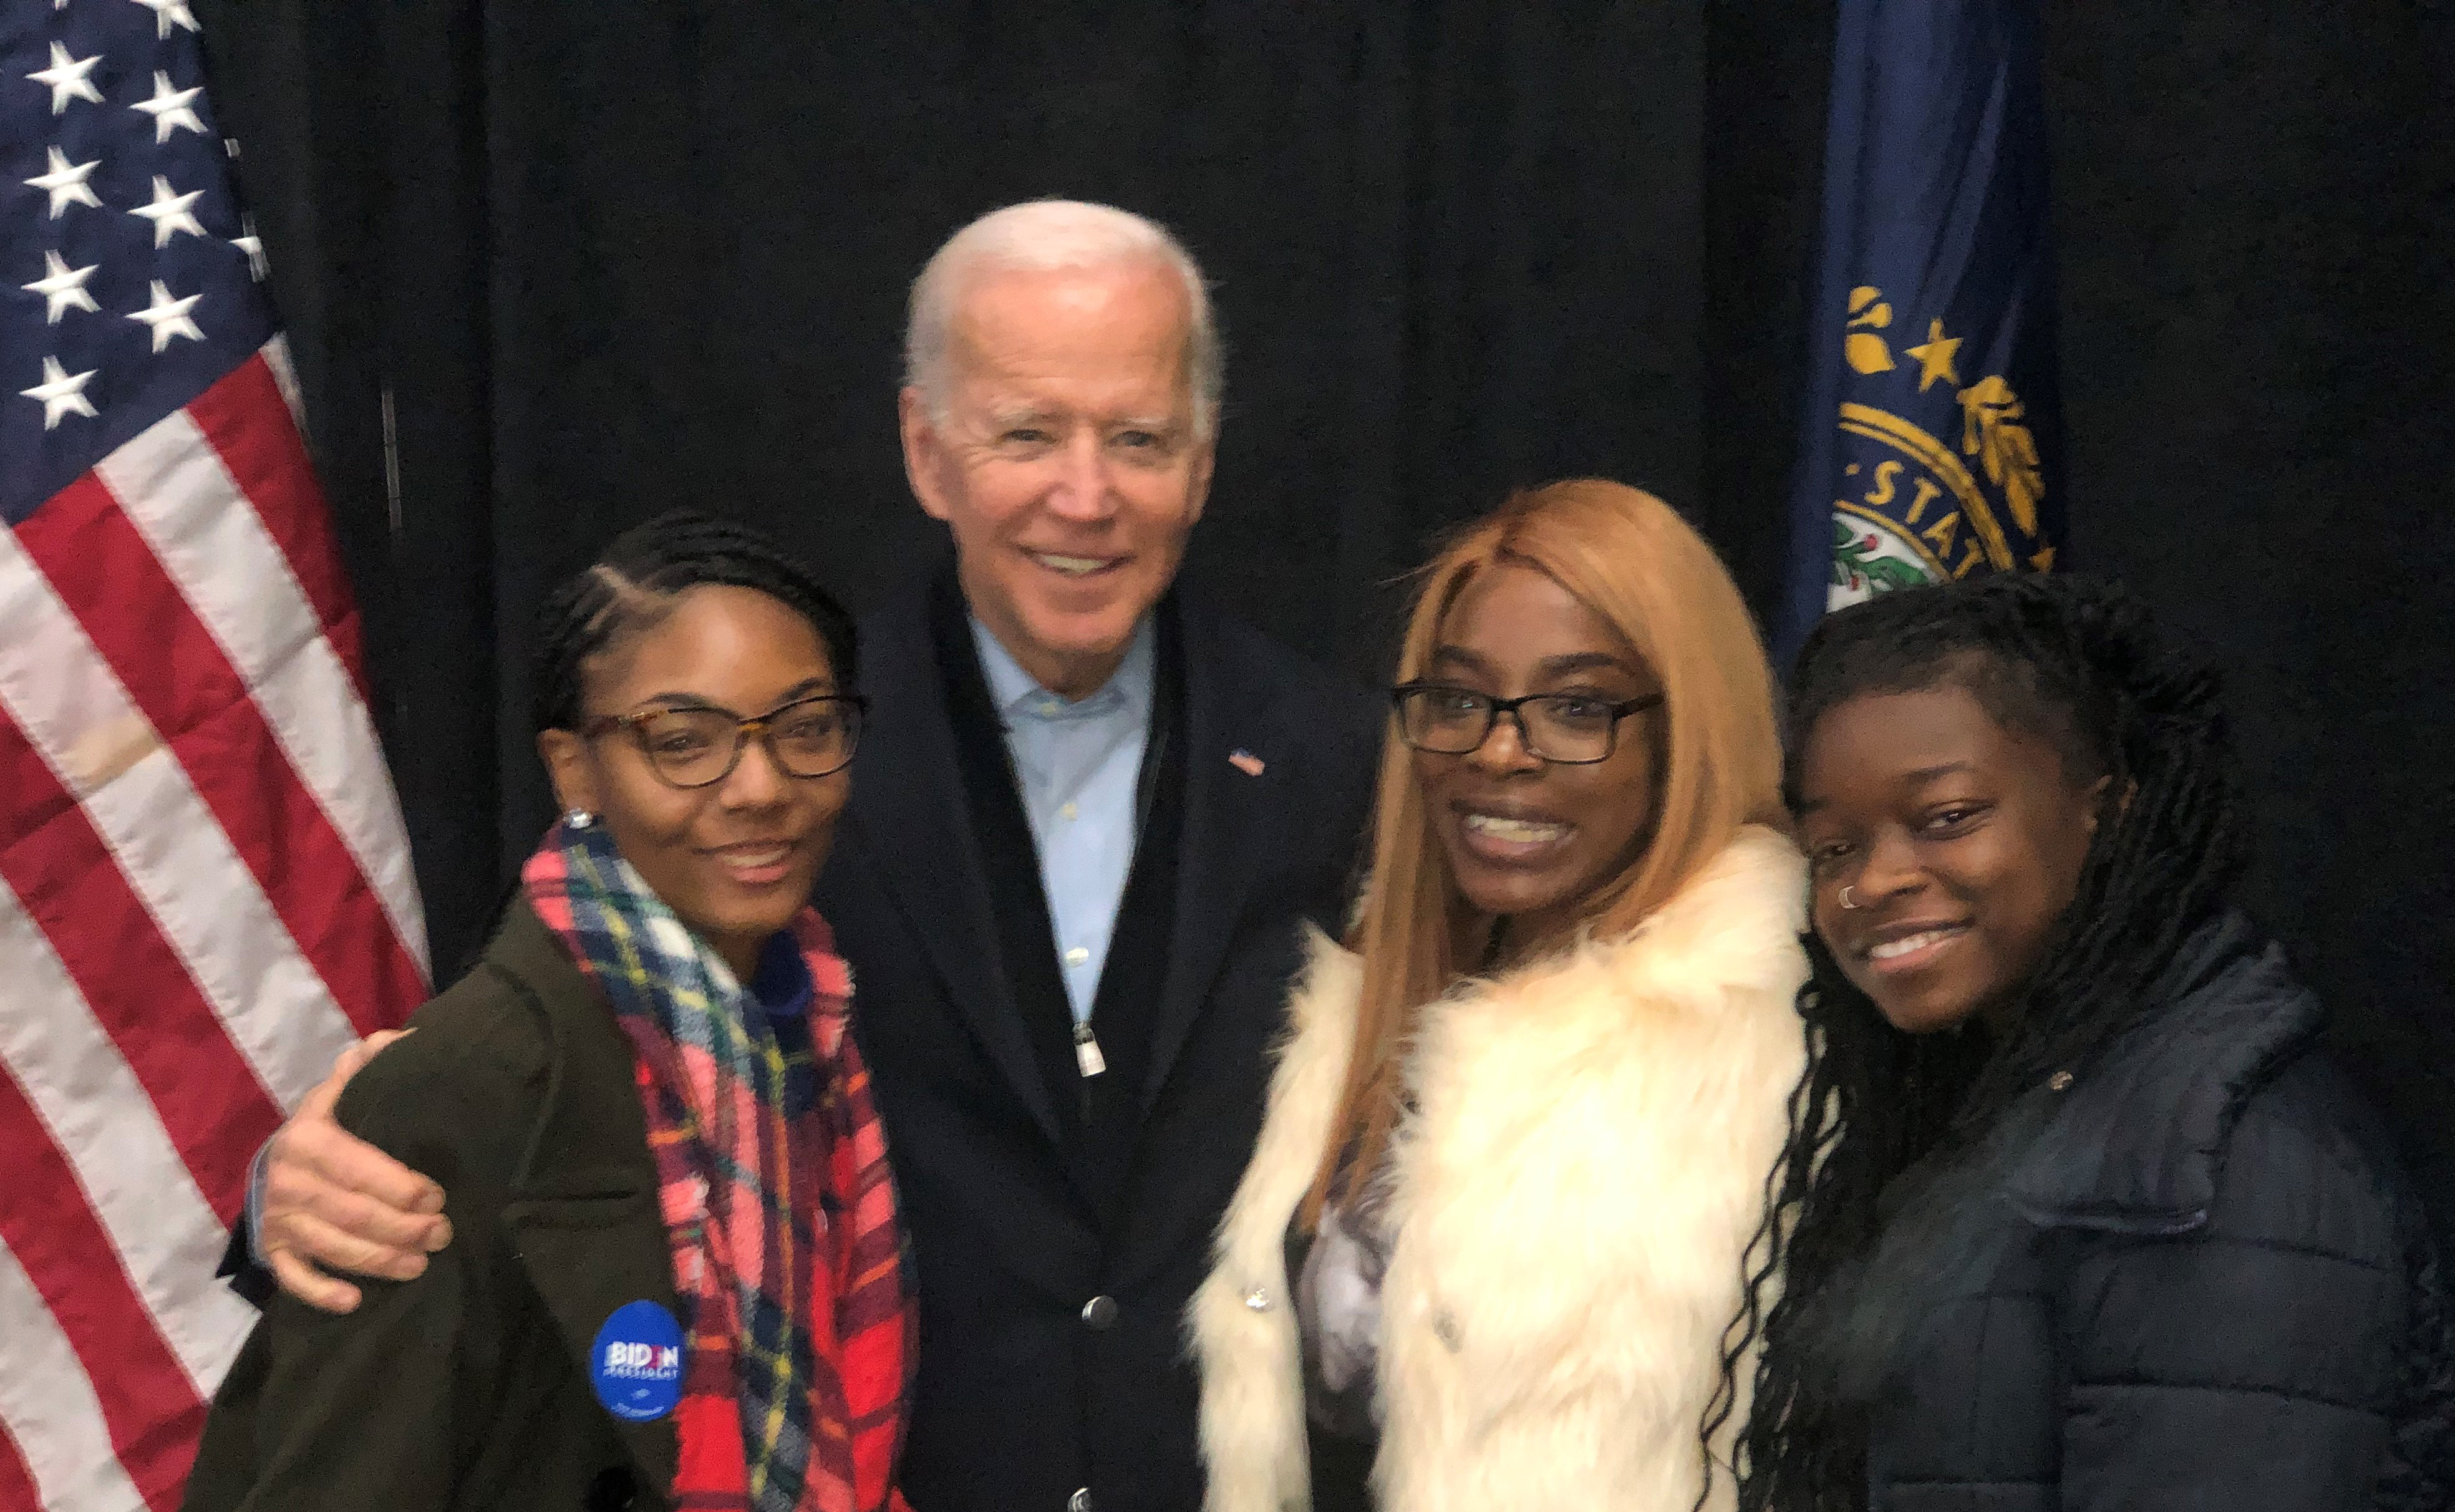 Presidential candidate and former Vice President Joe Biden pose with Delaware State University students (l-r) Da’Vonne Duncan, Folasade Olugbuyi, and Kendra Hand, who visited New Hampshire to experience the campaign environment.